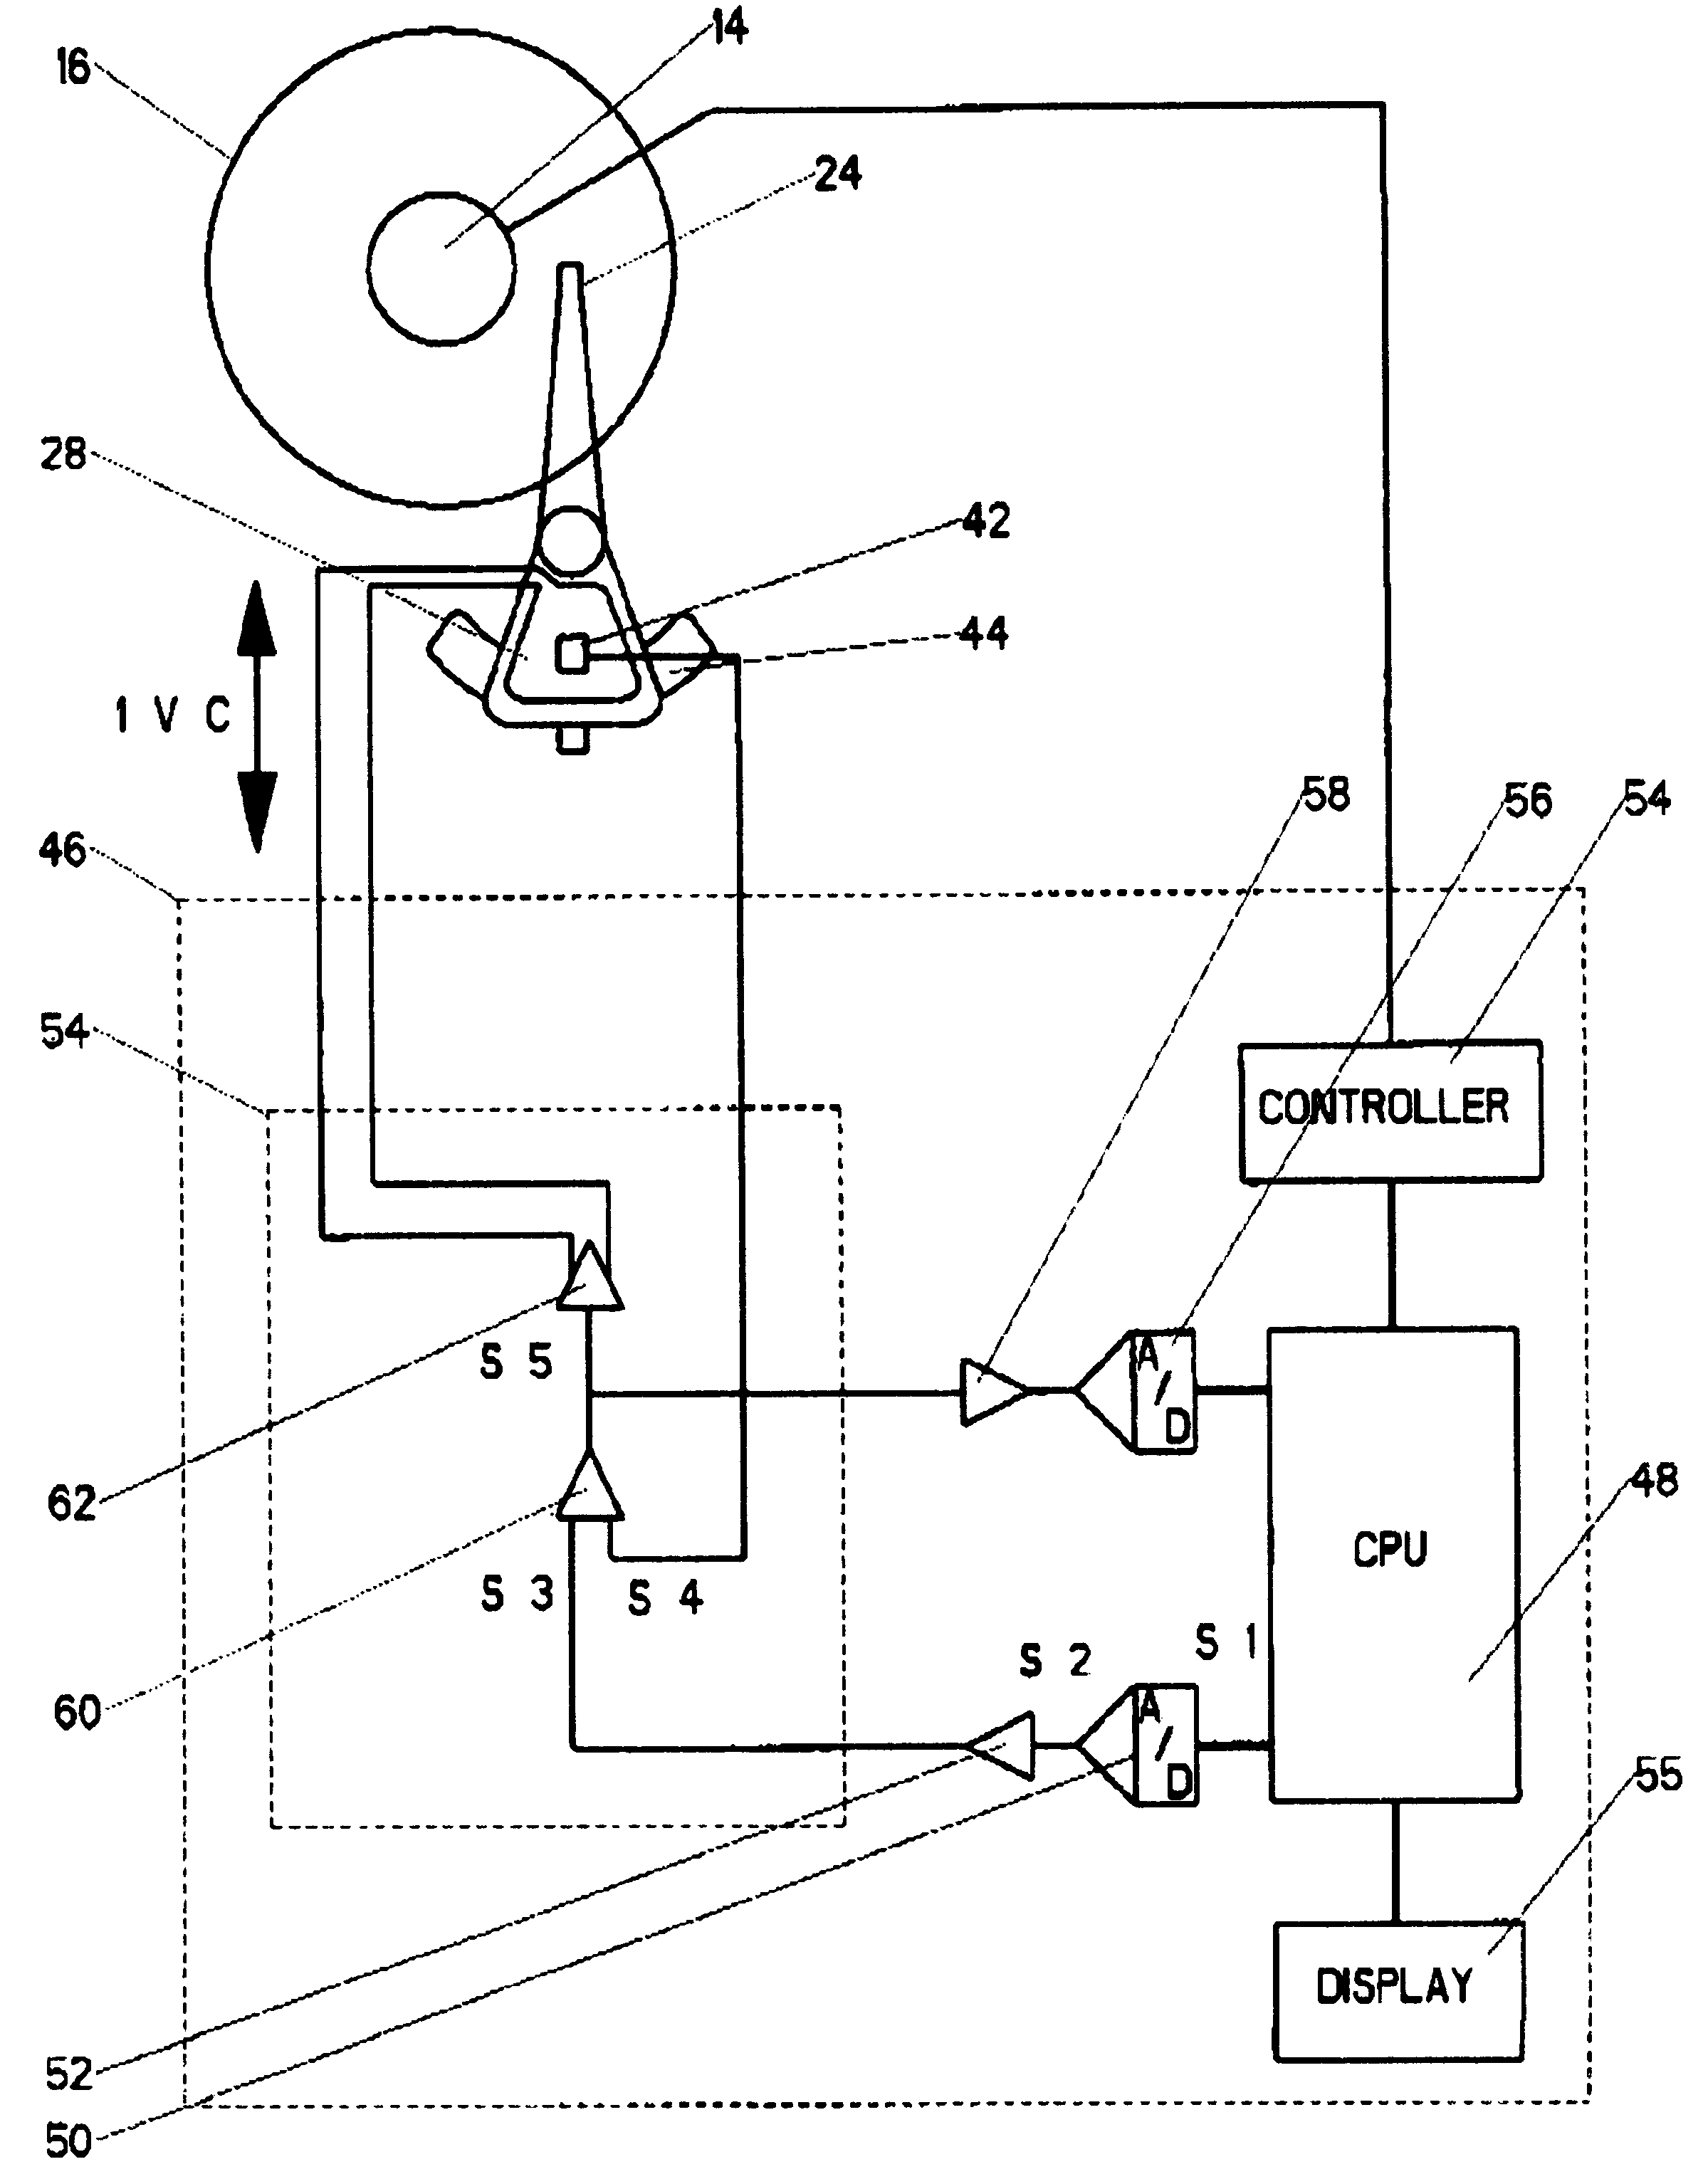 Method and apparatus for testing magnetic heads and hard disks